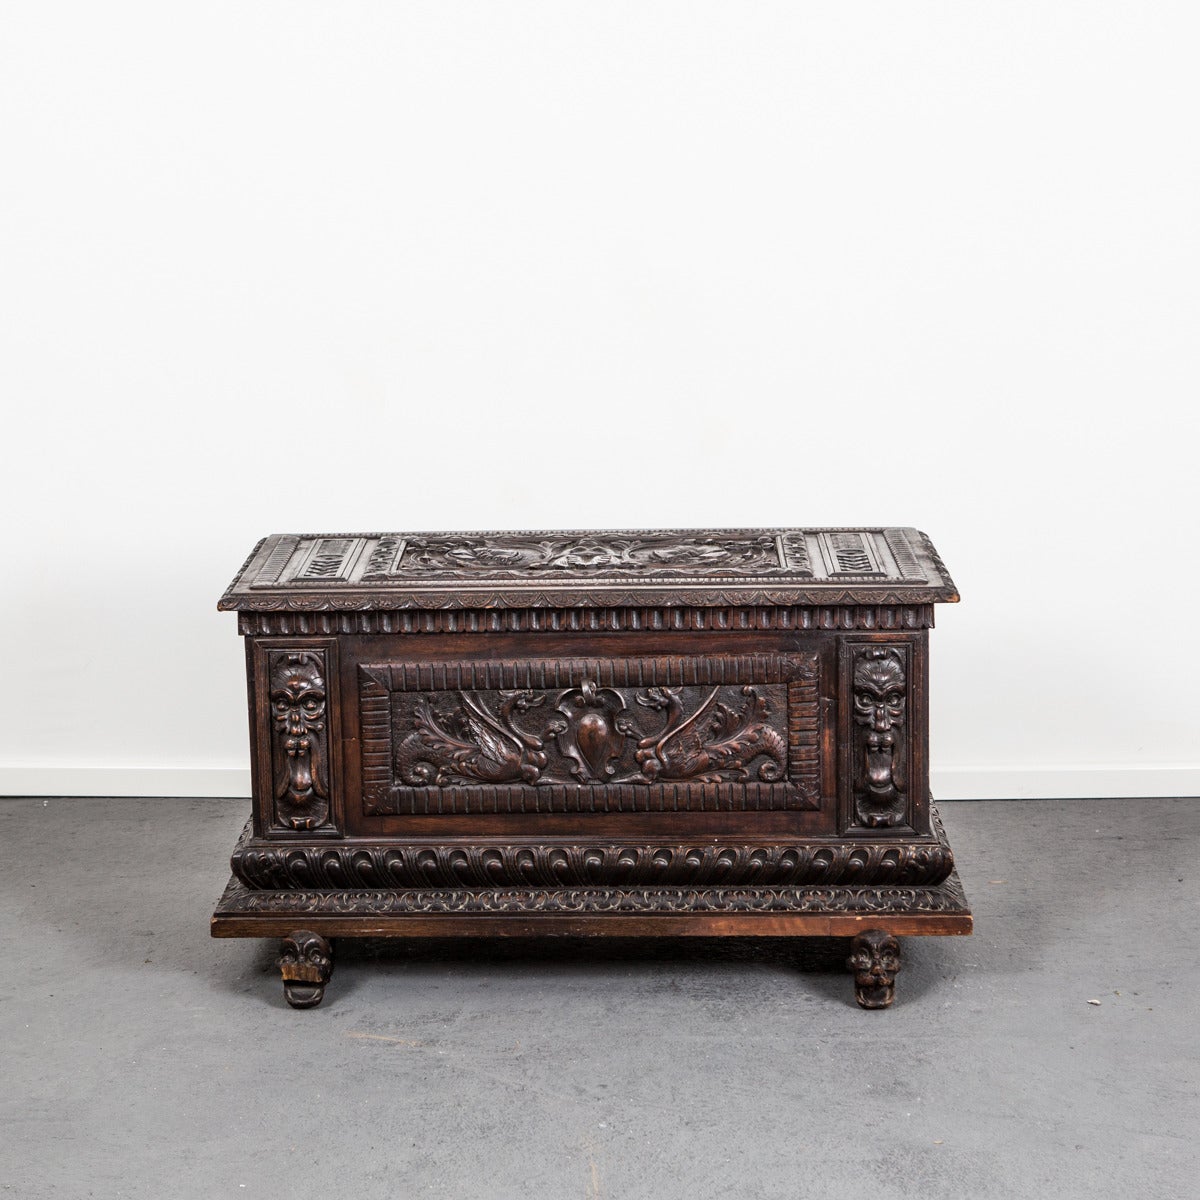 Chest Italian Renaissance period 17th century oak Italy. A stunning chest with exquisite carvings made in oak during the Renaissance period, most likely Italy. Feet in shape of dragons/dogs. Original hardware.